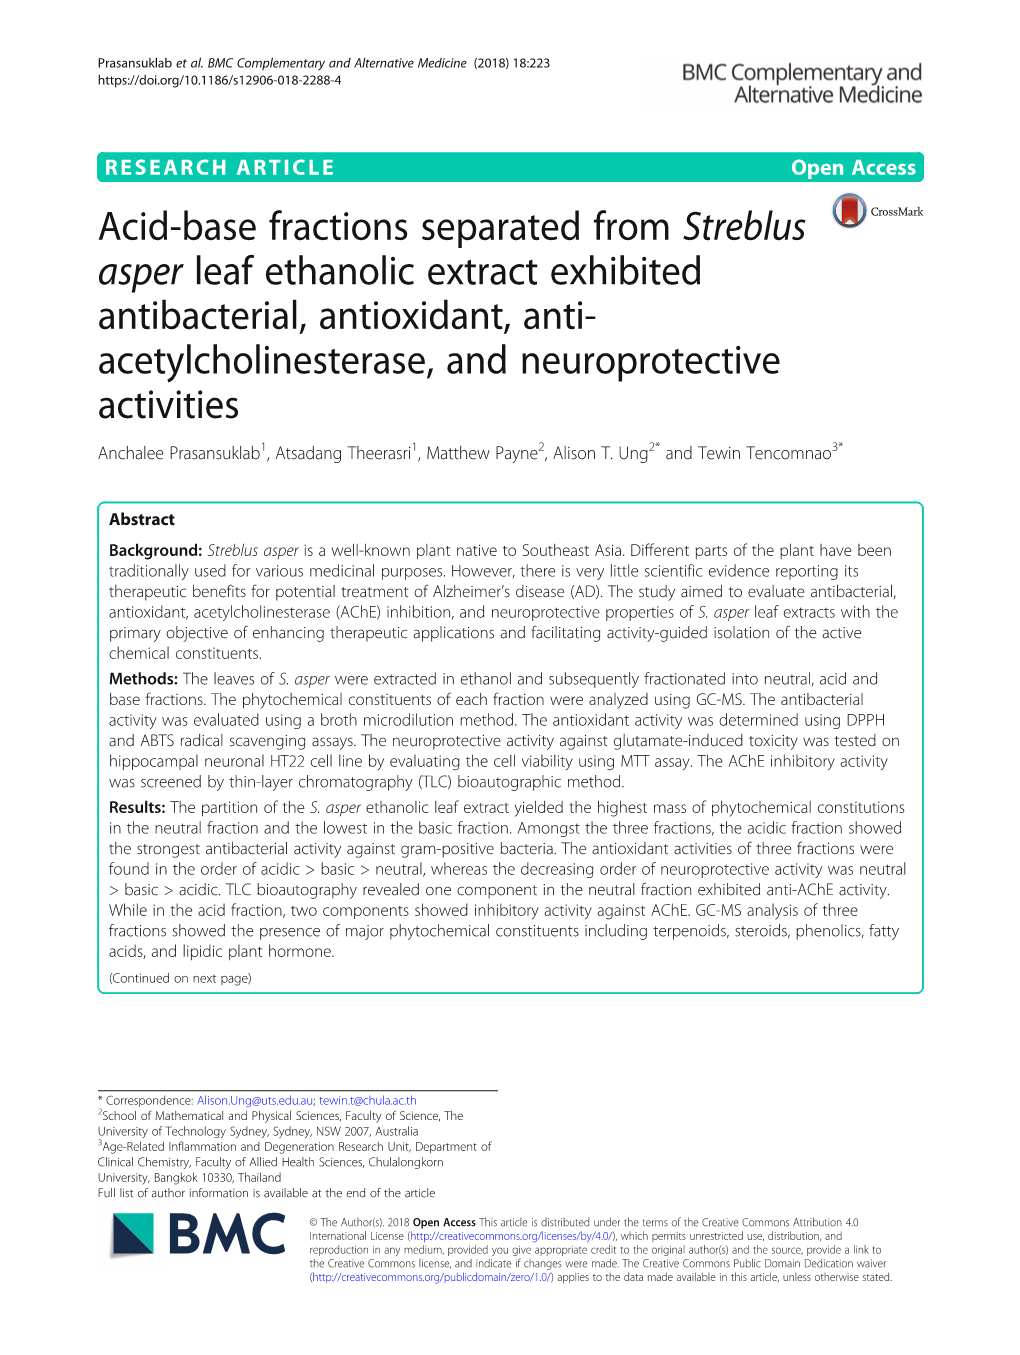 Acid-Base Fractions Separated from Streblus Asper Leaf Ethanolic Extract